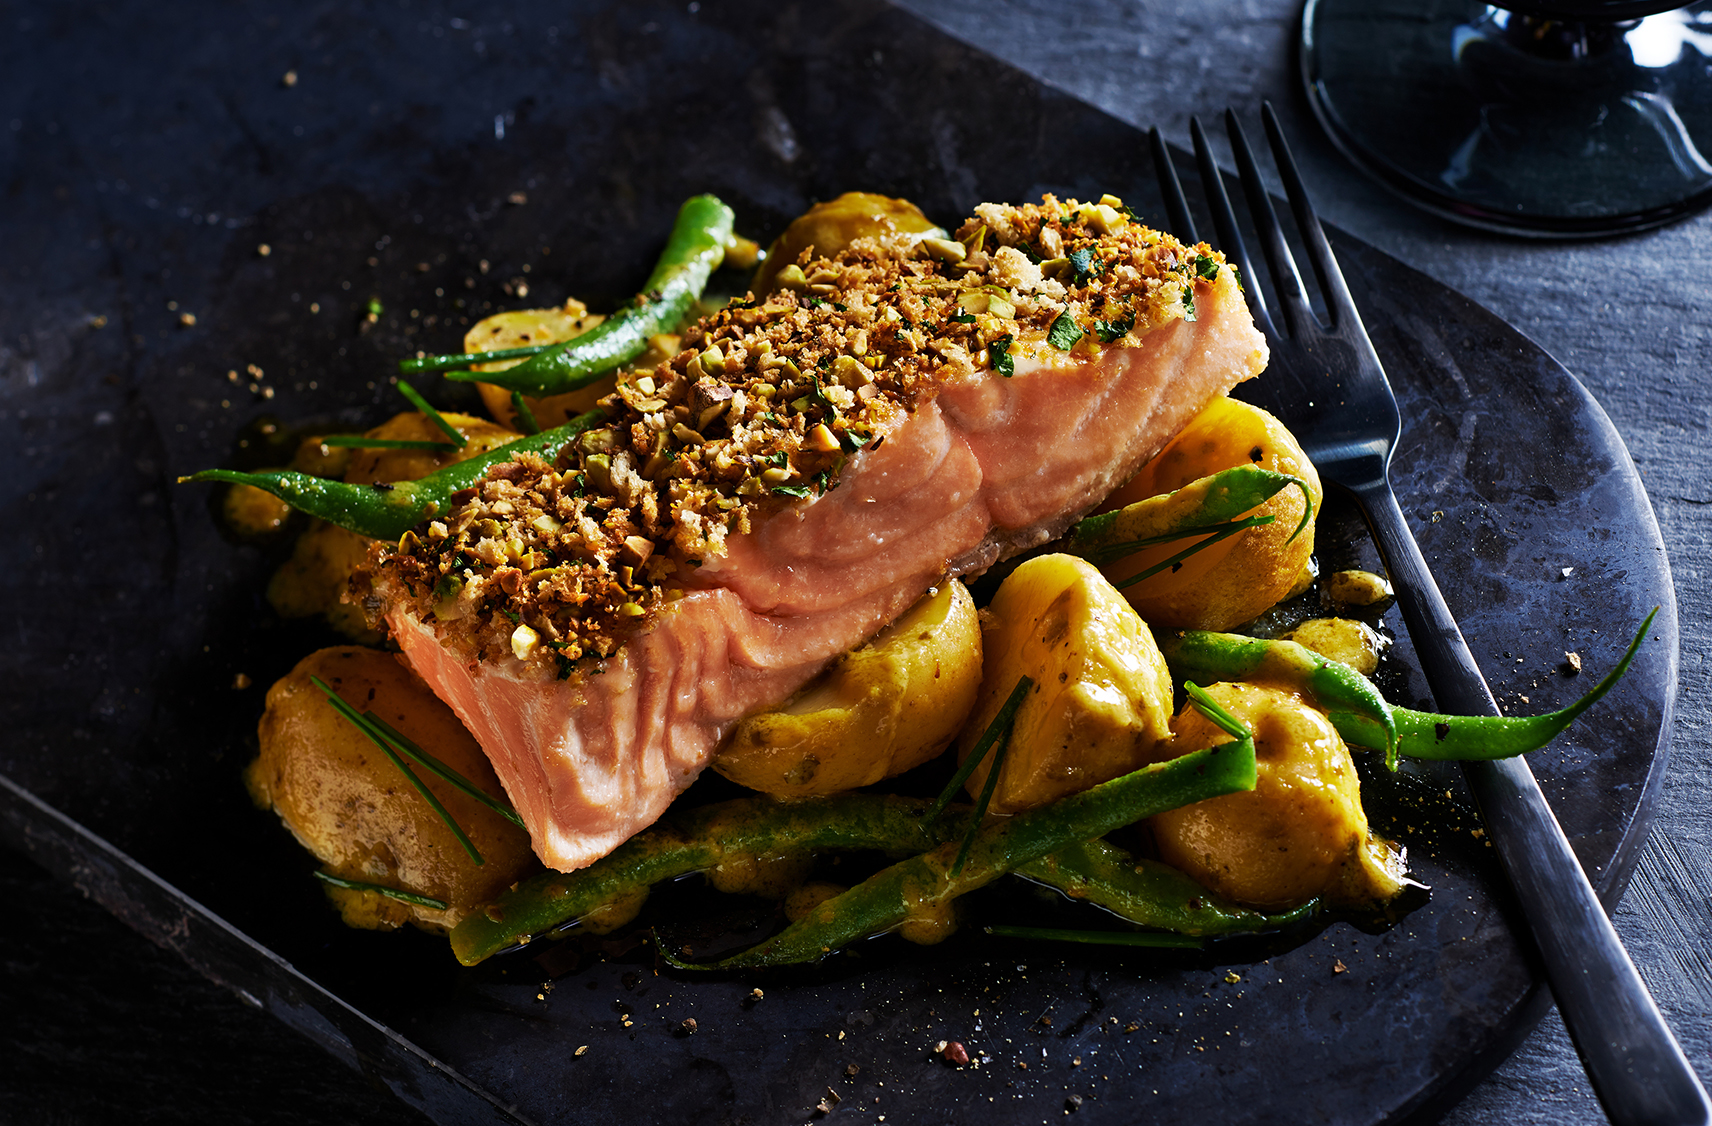 A pistachio-crusted salmon fillet on top of mini potatoes & green beans